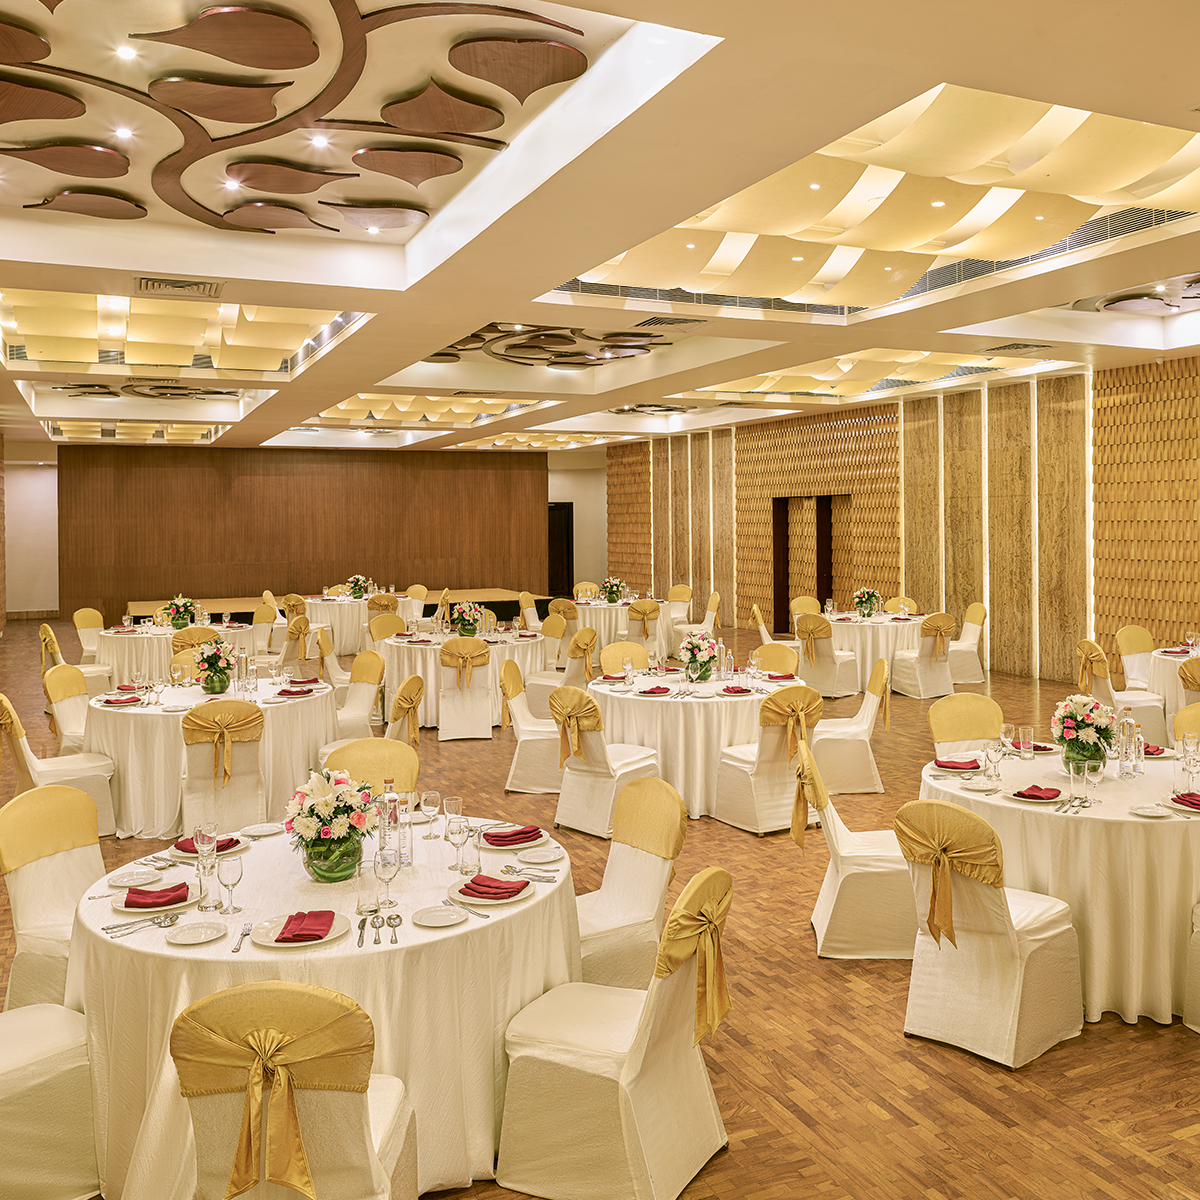 Be it a wedding, an art exhibition, corporate events, a business conference or a product launch, 
Ramada Kochi sets the ideal venue for the occasion